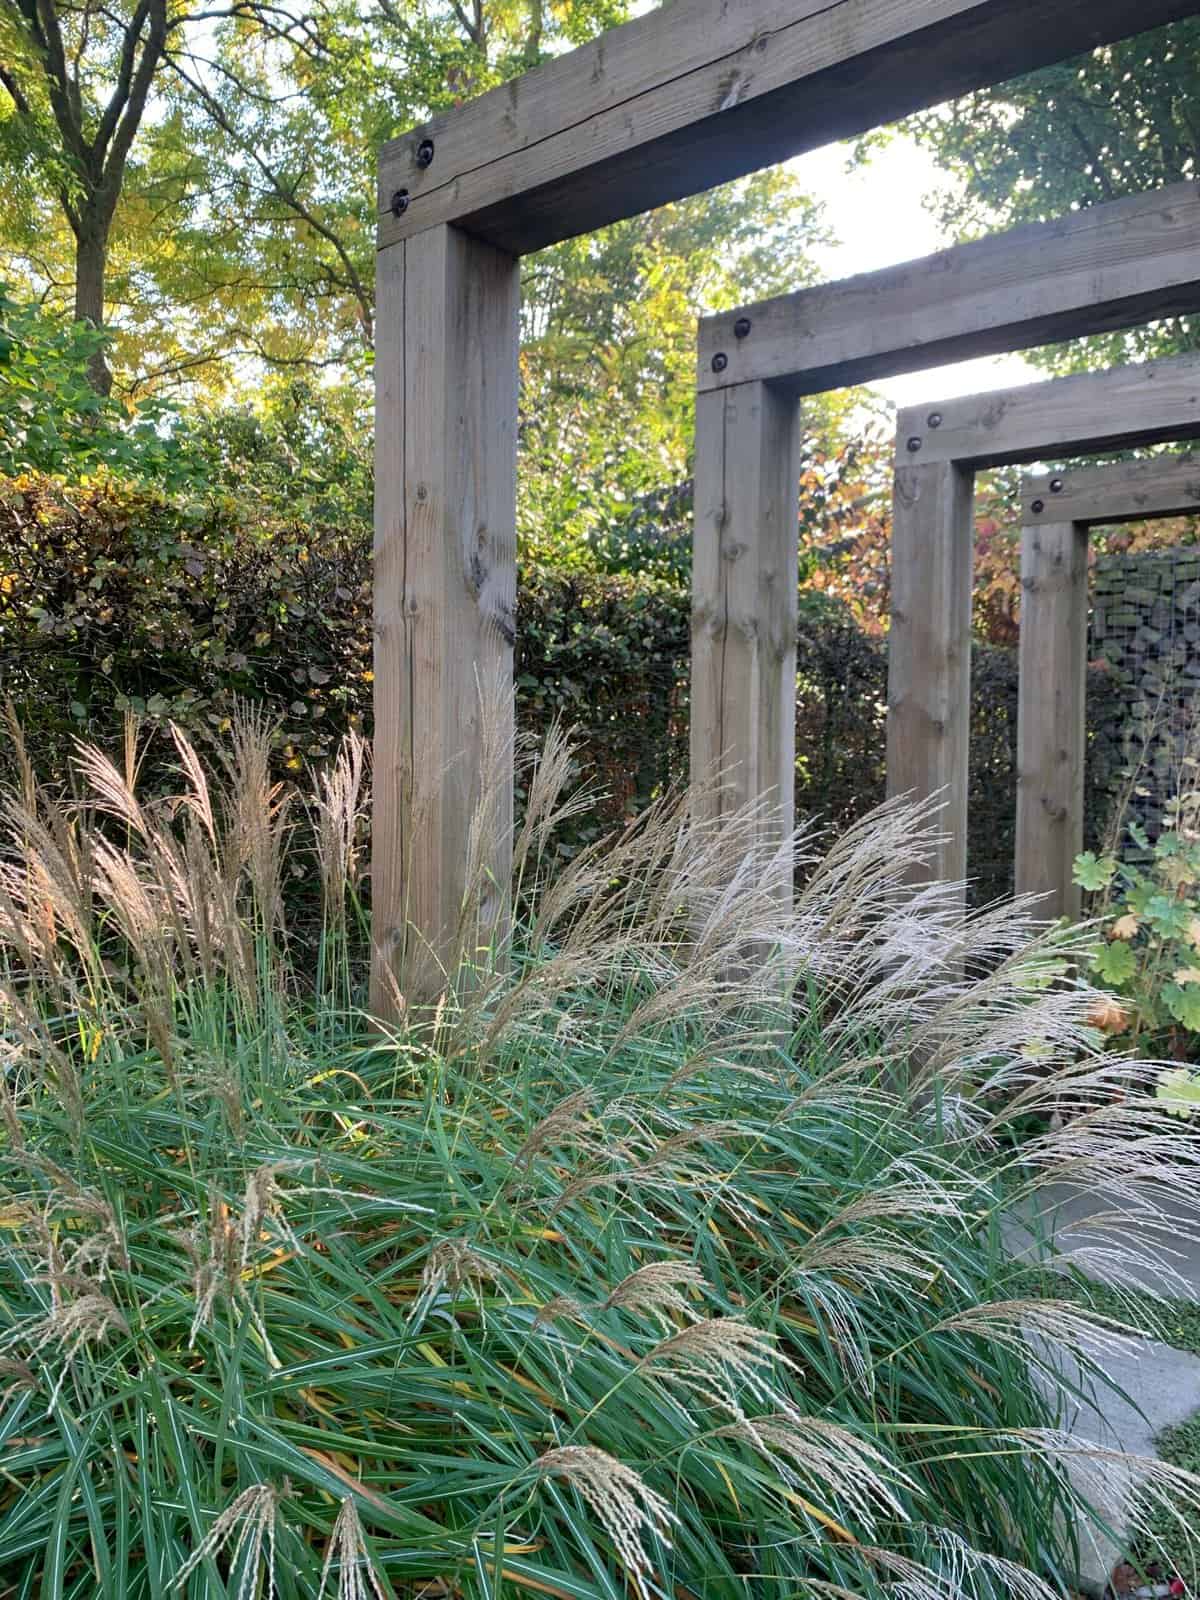 A lush garden scene features tall ornamental grasses in the foreground and several wooden pergola structures extending into the background. Surrounding foliage and trees add a variety of greens and autumnal hues, creating an inspiring space for ideation and fostering better ideas.